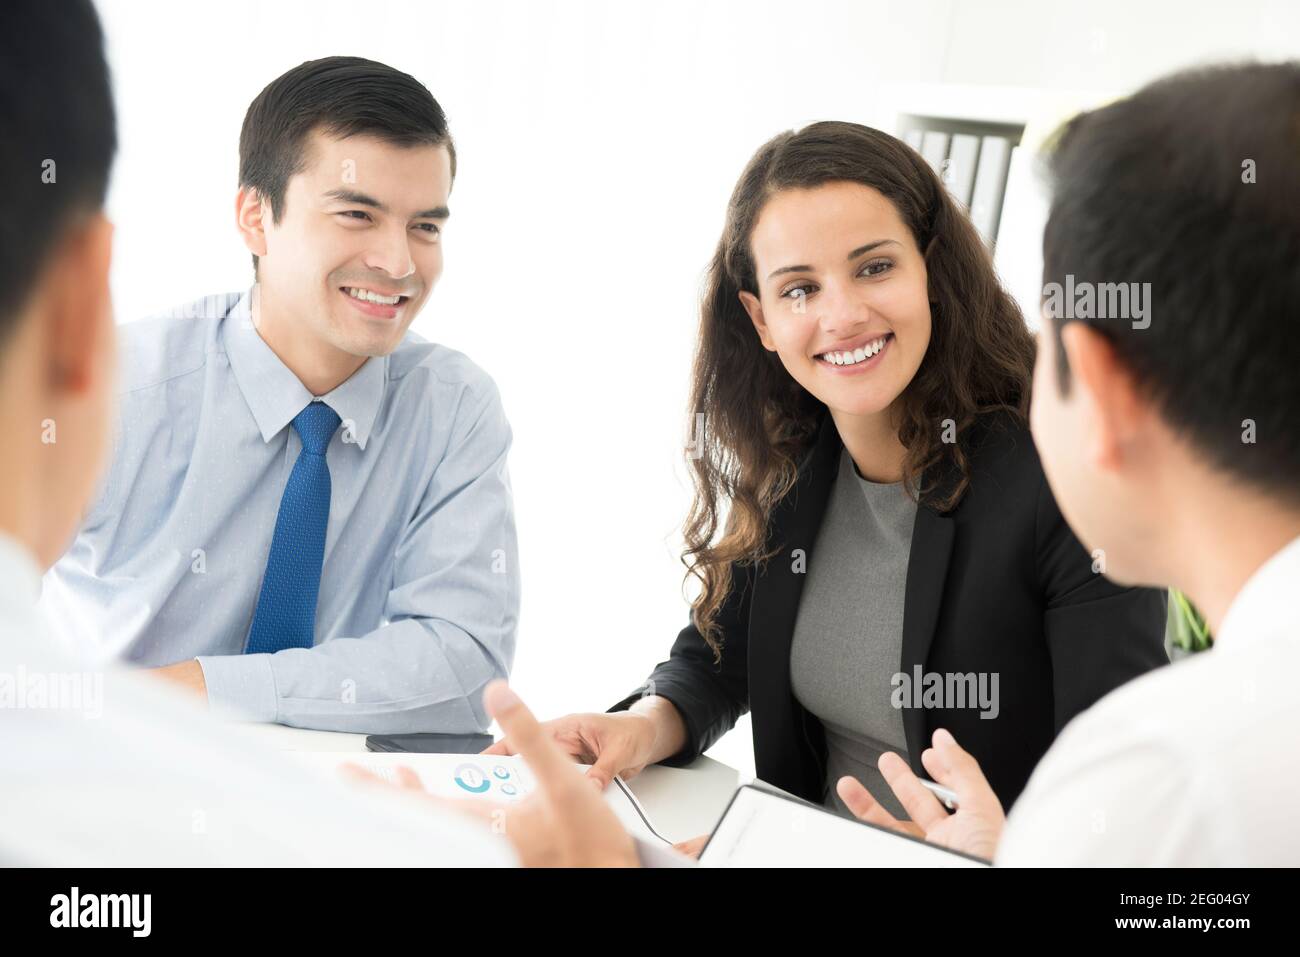 Business people discussing work at the meeting Stock Photo